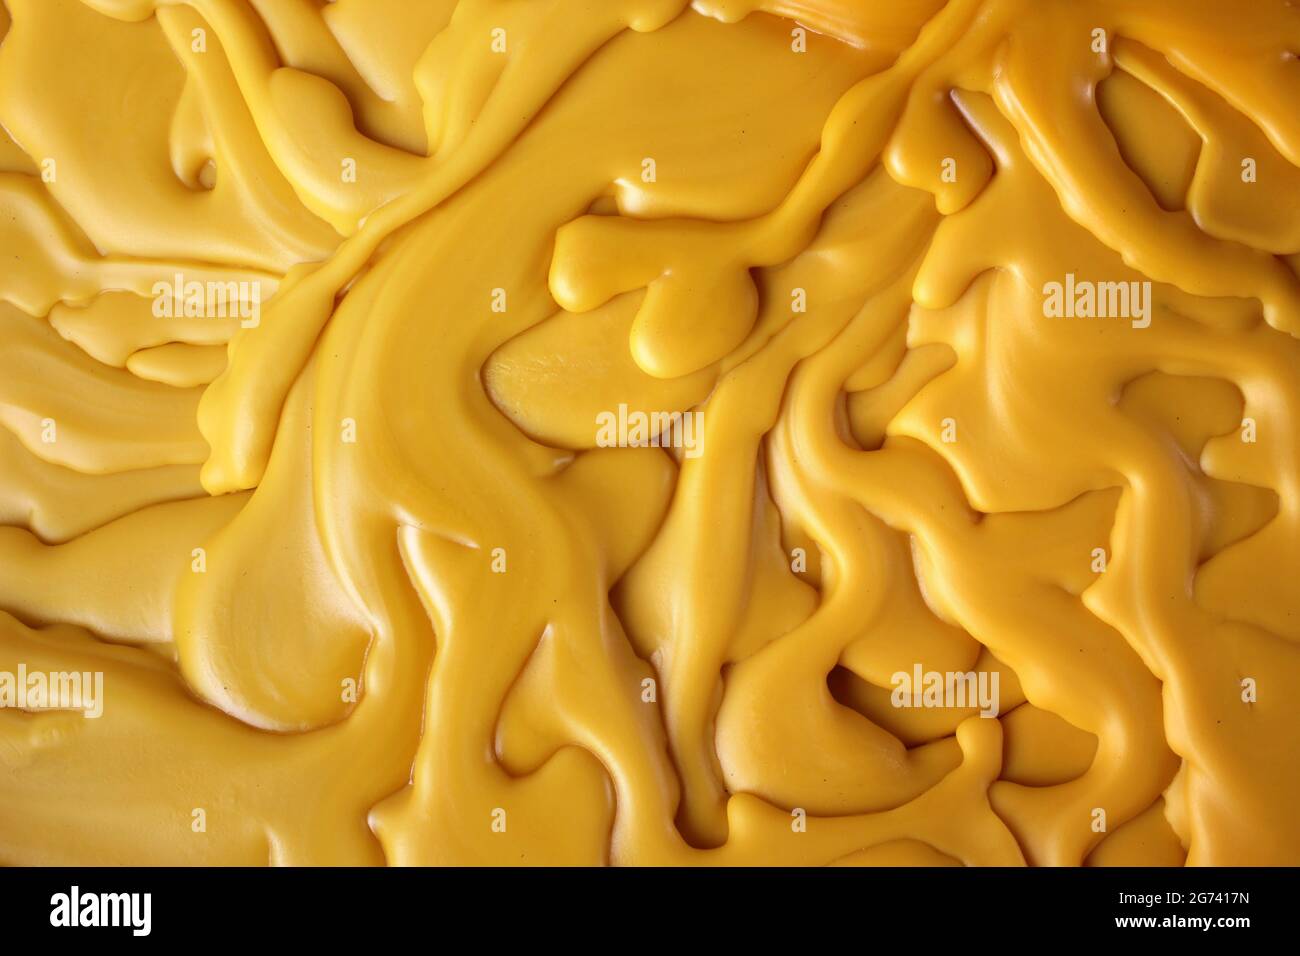 melting candles, yellow candle drippings as background Stock Photo